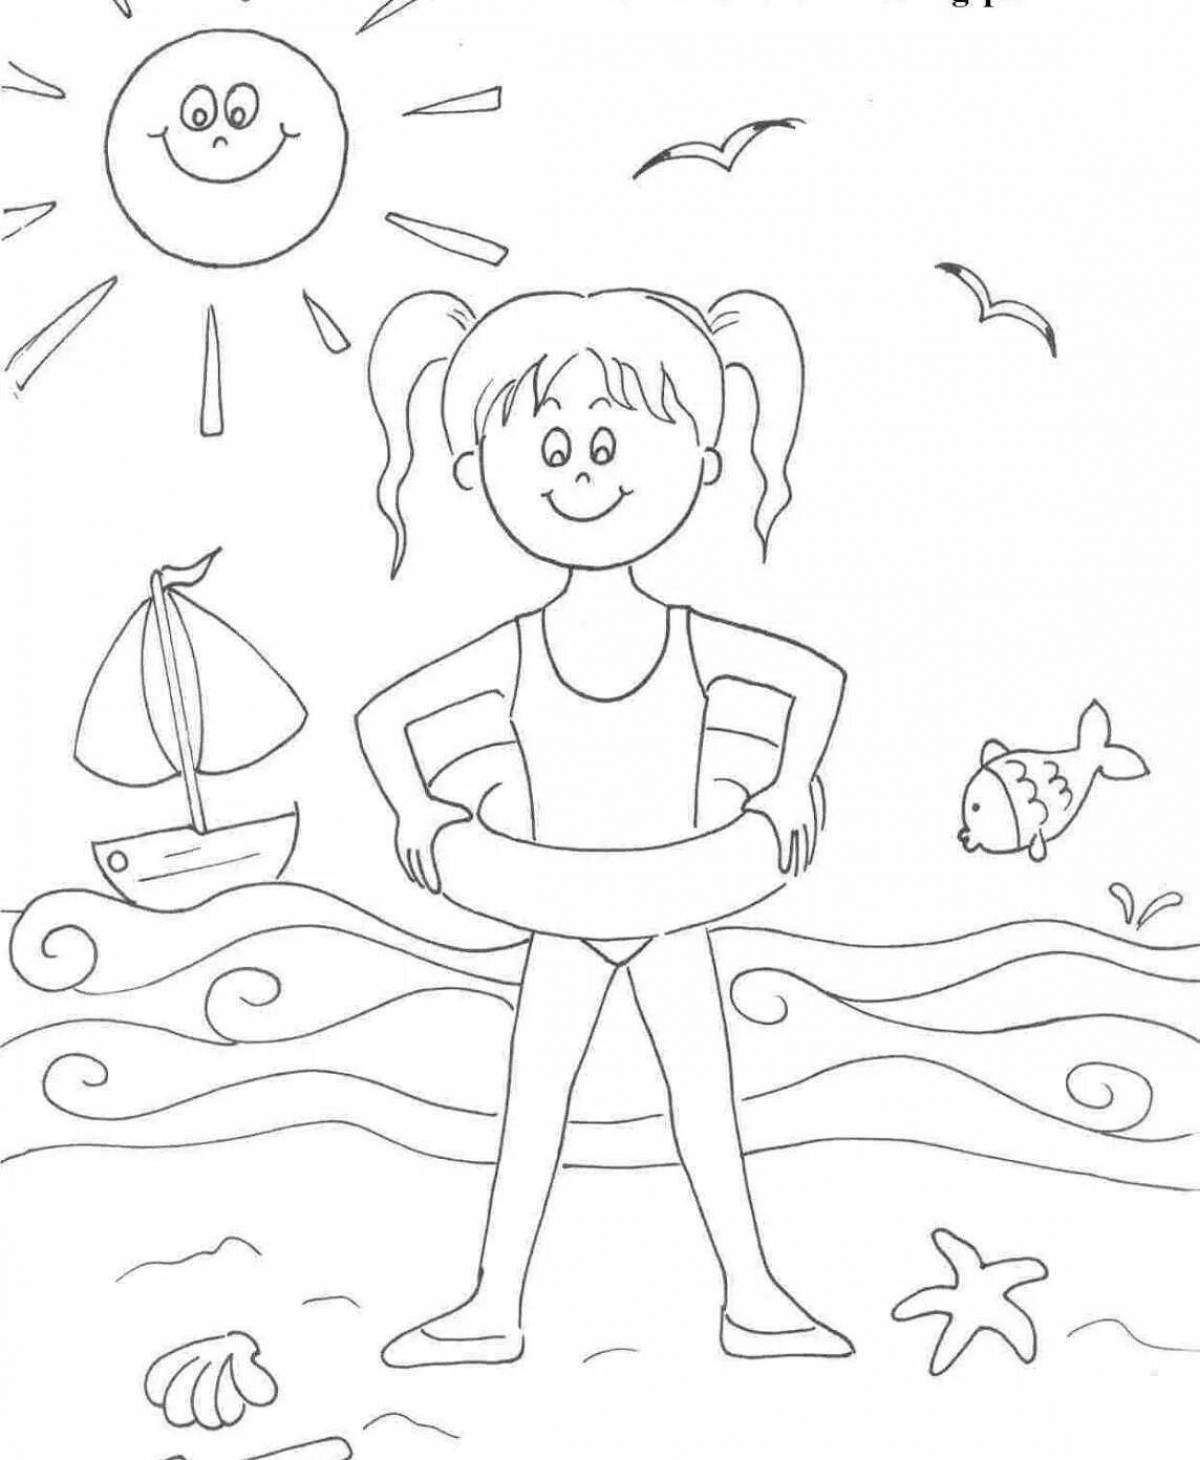 Colorful water safety coloring page